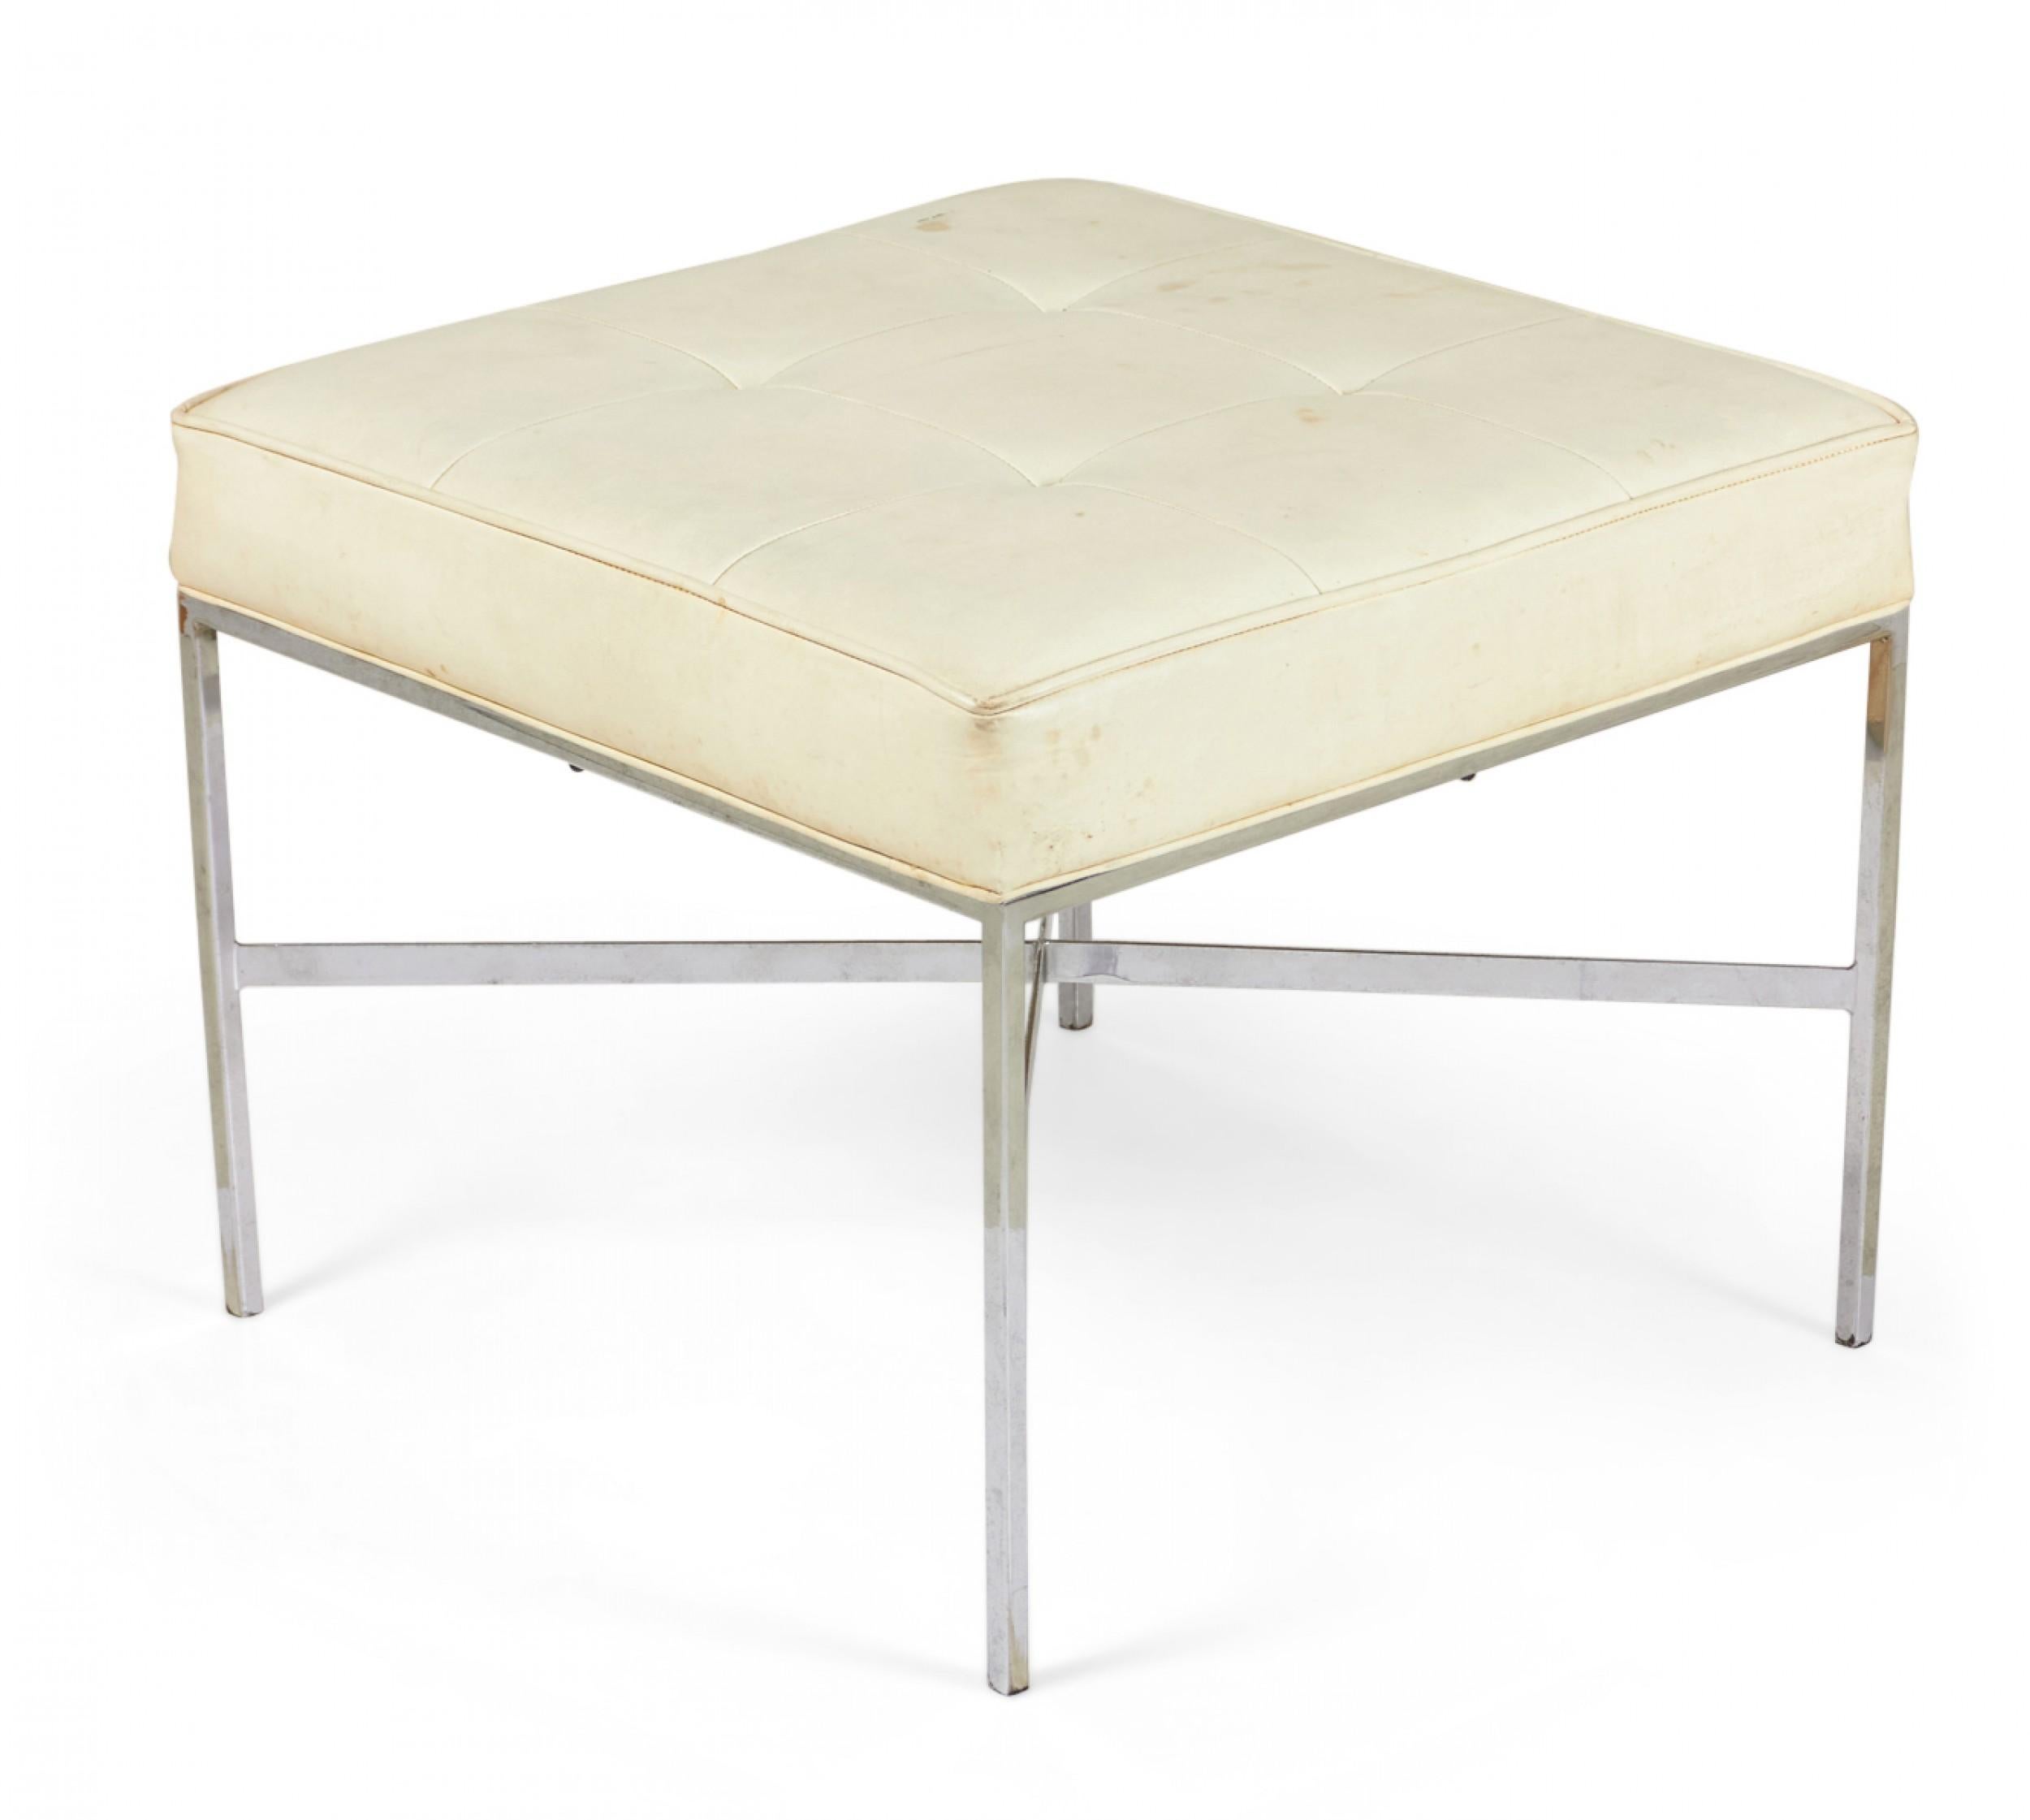 20th Century Design Institute of Chrome and Button Tufted White Vinyl Square Bench For Sale